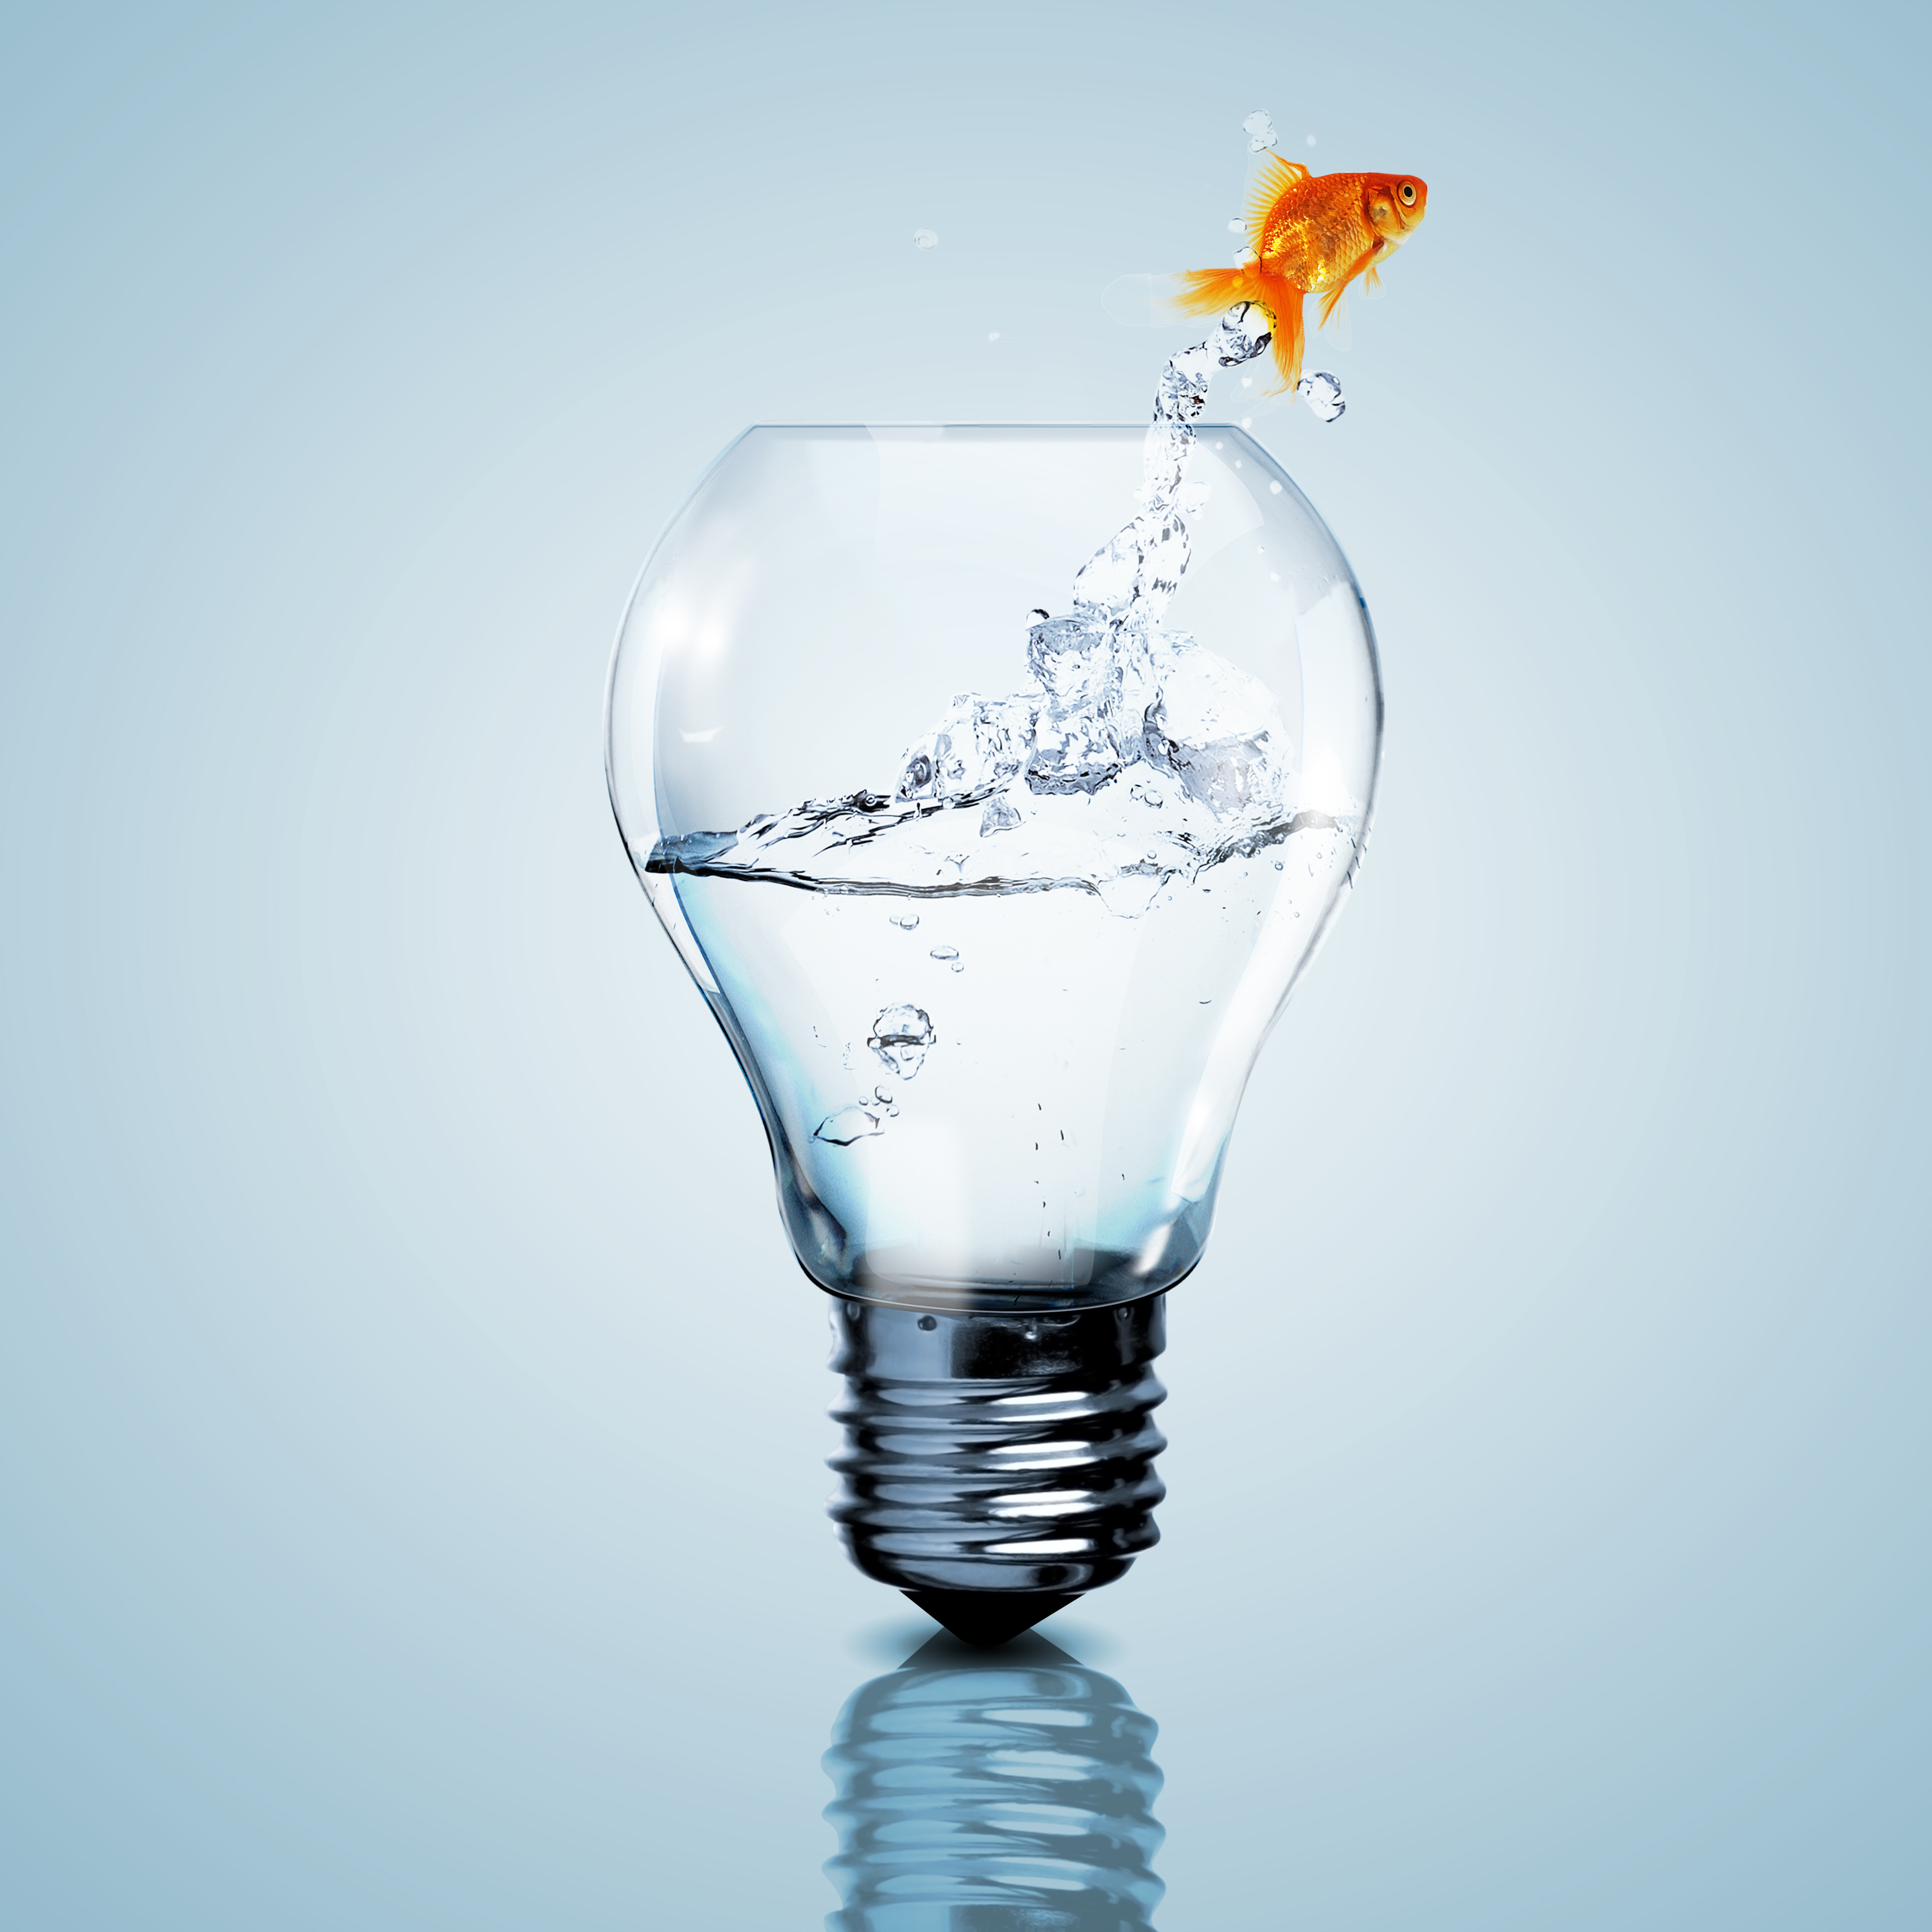 Goldfish leaping from a fish bowl shaped like a lightbulb